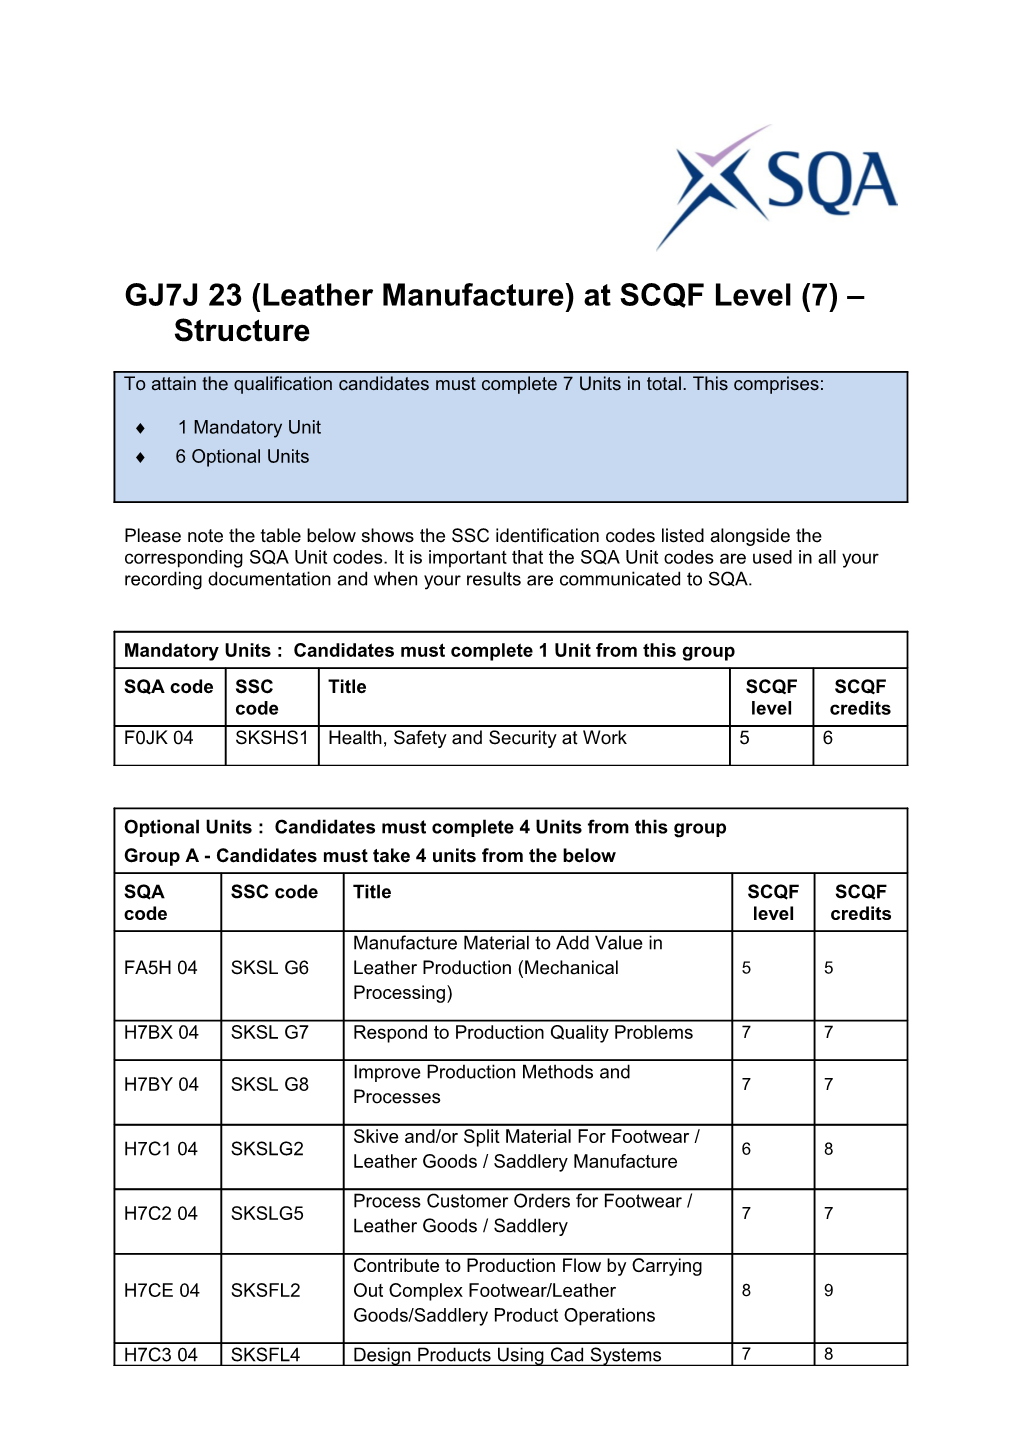 GJ7J 23(Leather Manufacture) at SCQF Level (7) Structure